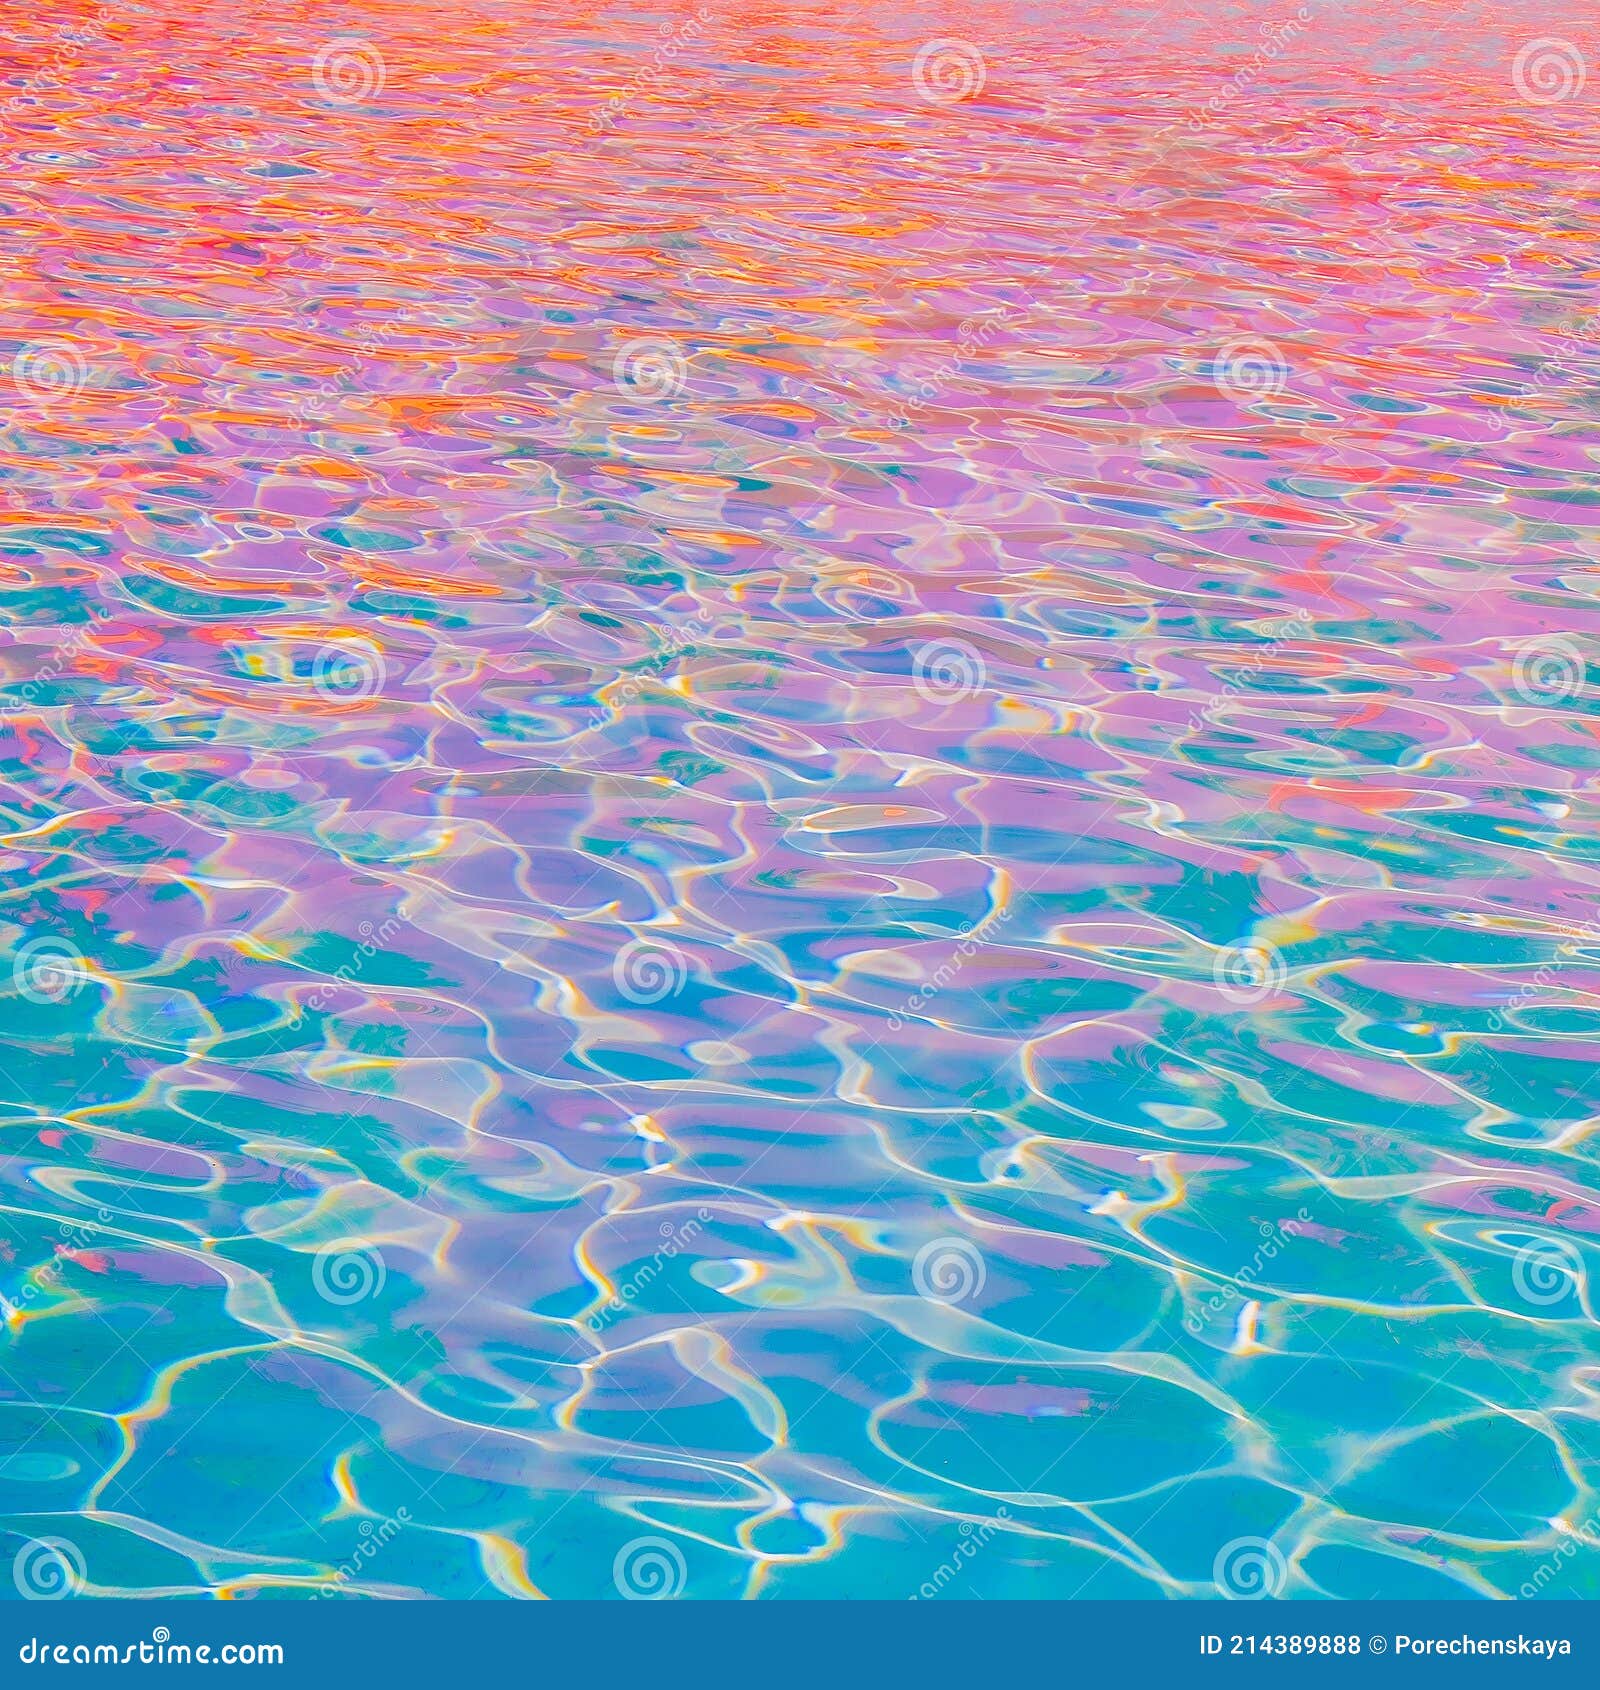 Minimalist Wallpaper Blue Pink Vaporwave Swimming Pool Relax Water.  Vacation Dreams Time Concept Stock Photo - Image of abstract, background:  214389888